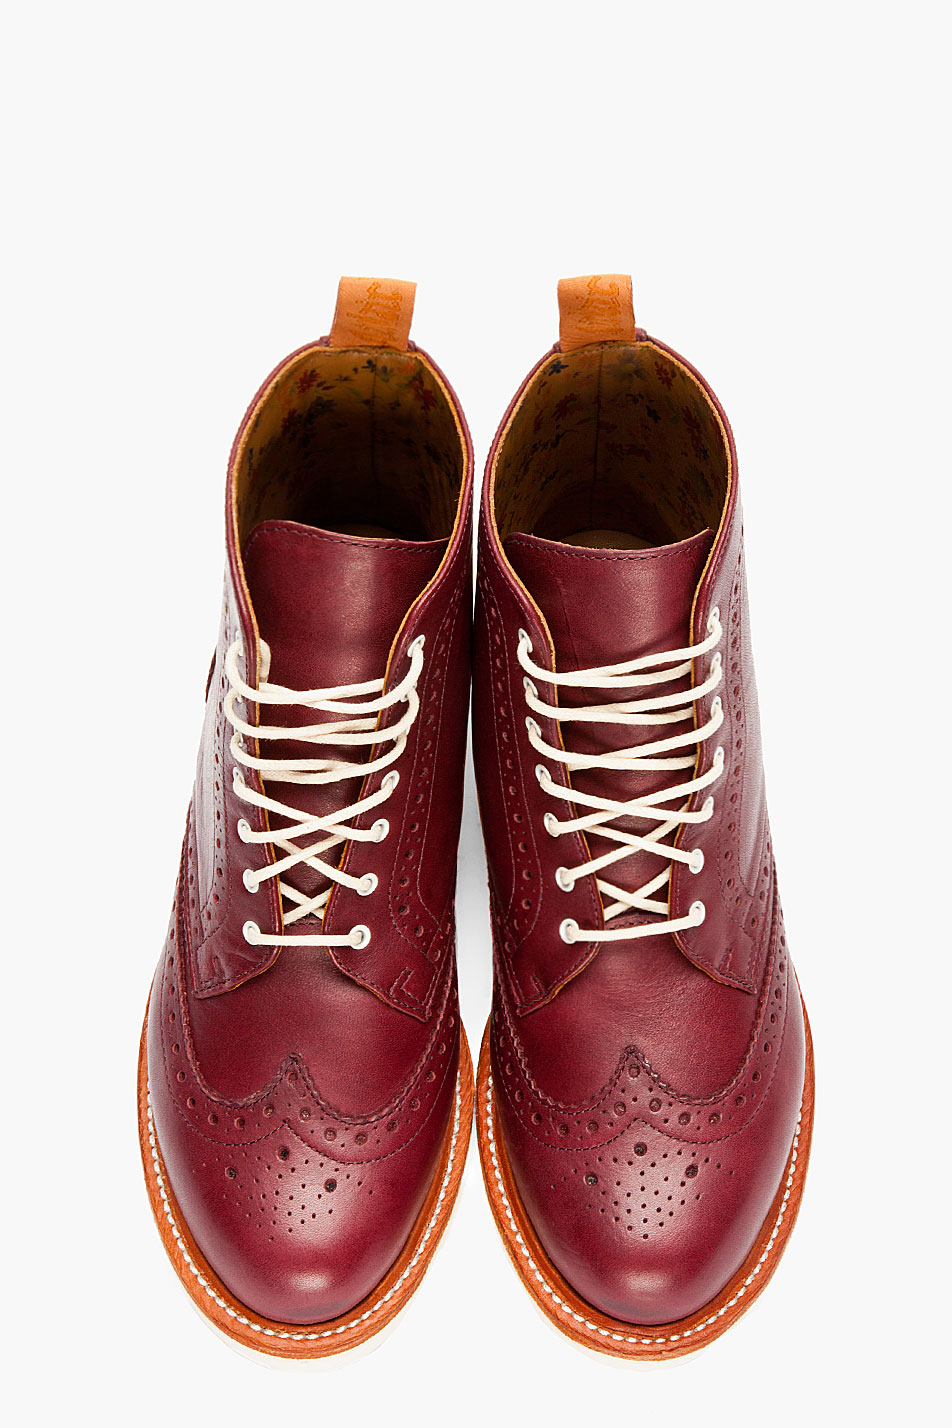 red brogue boots